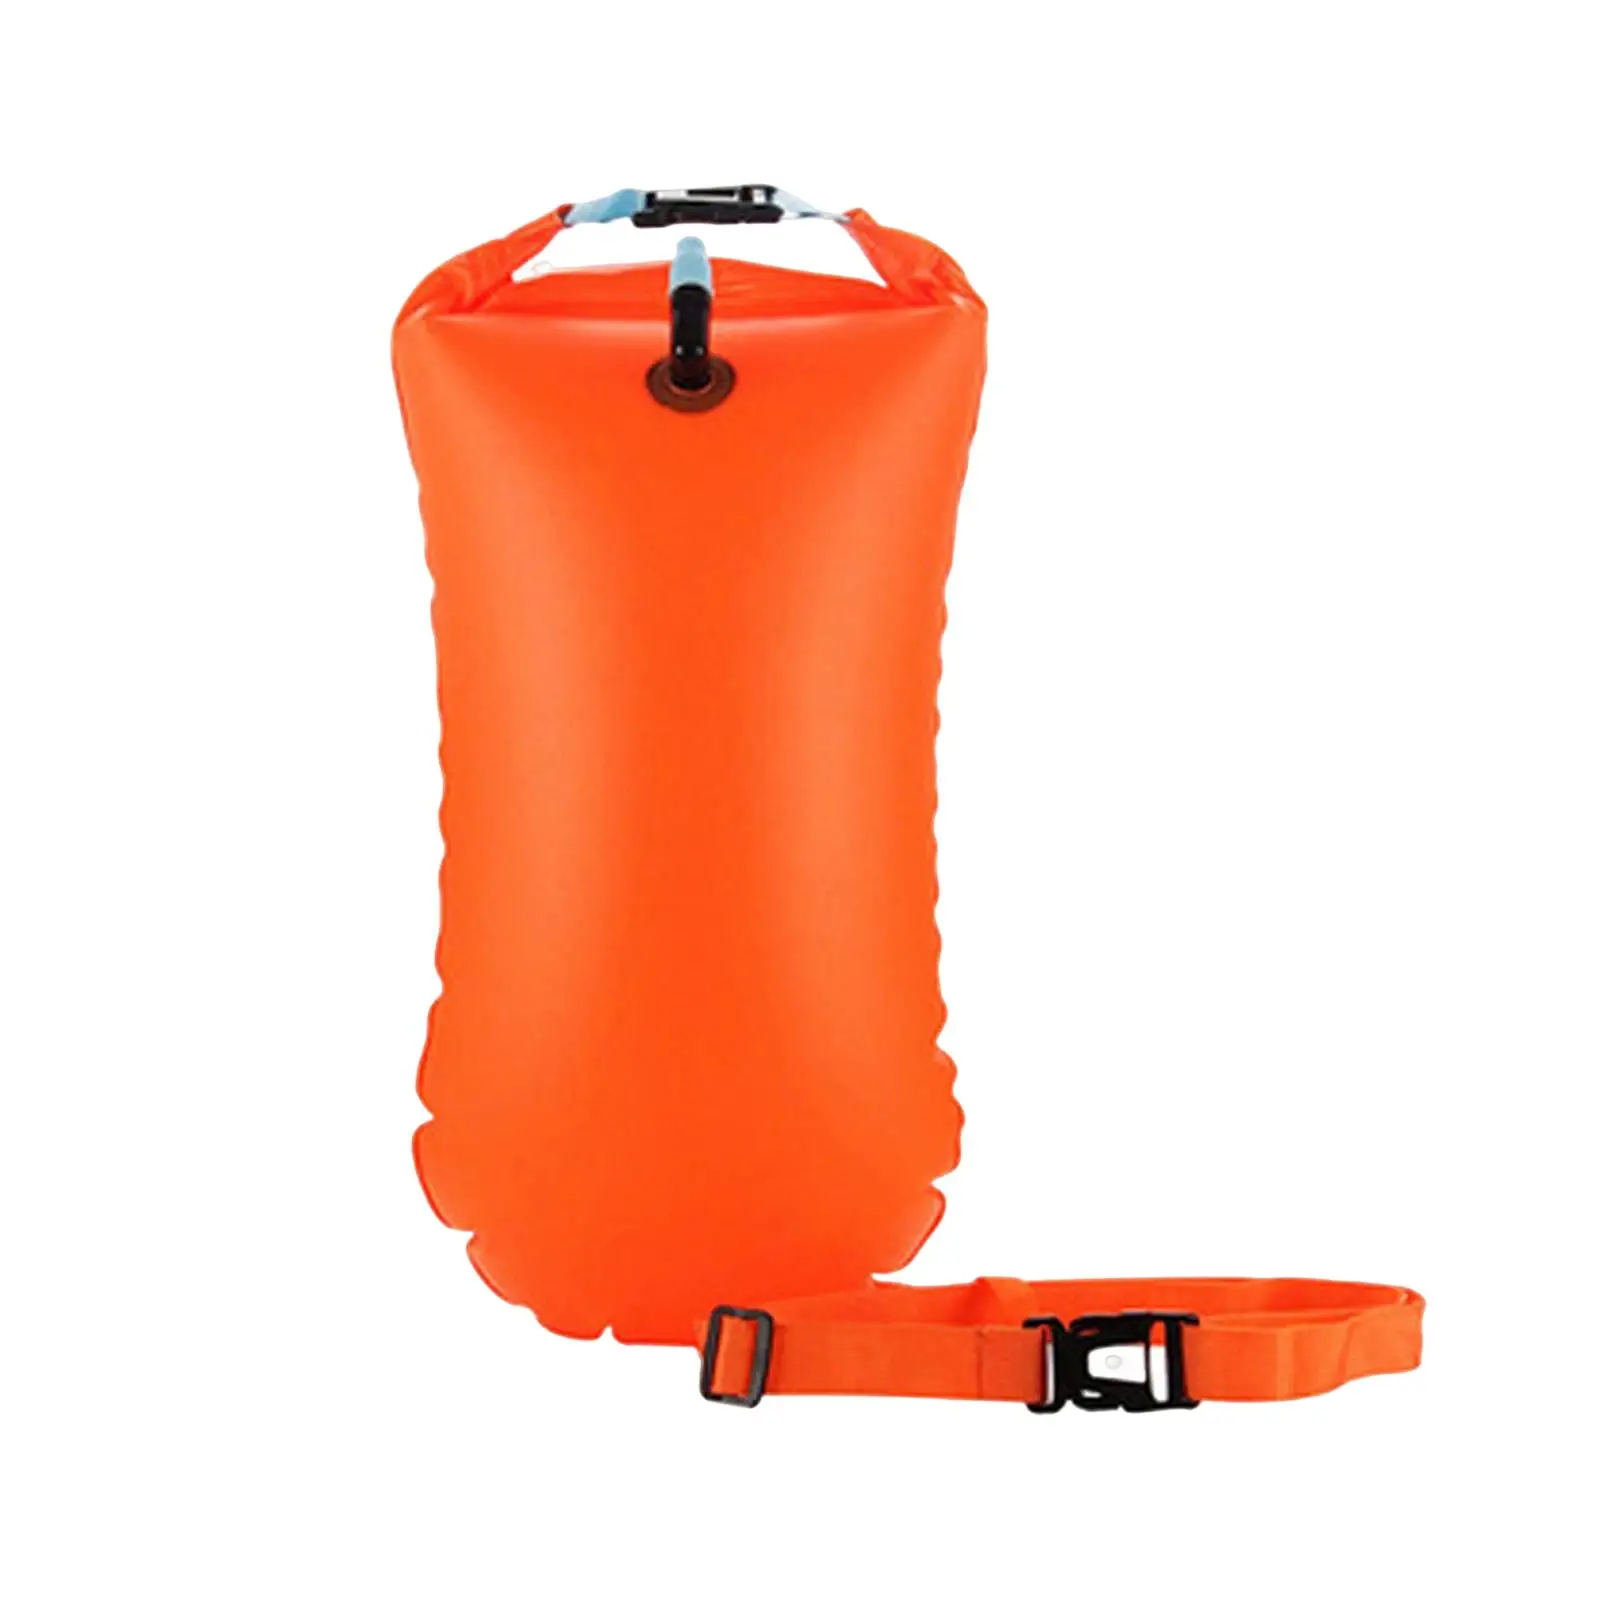 Waterproof Dry Bag Inflatable Safety Swim Buoy Tow Float Dry Bag for For Boating Fishing Rafting Swimming Snorkeling Boating